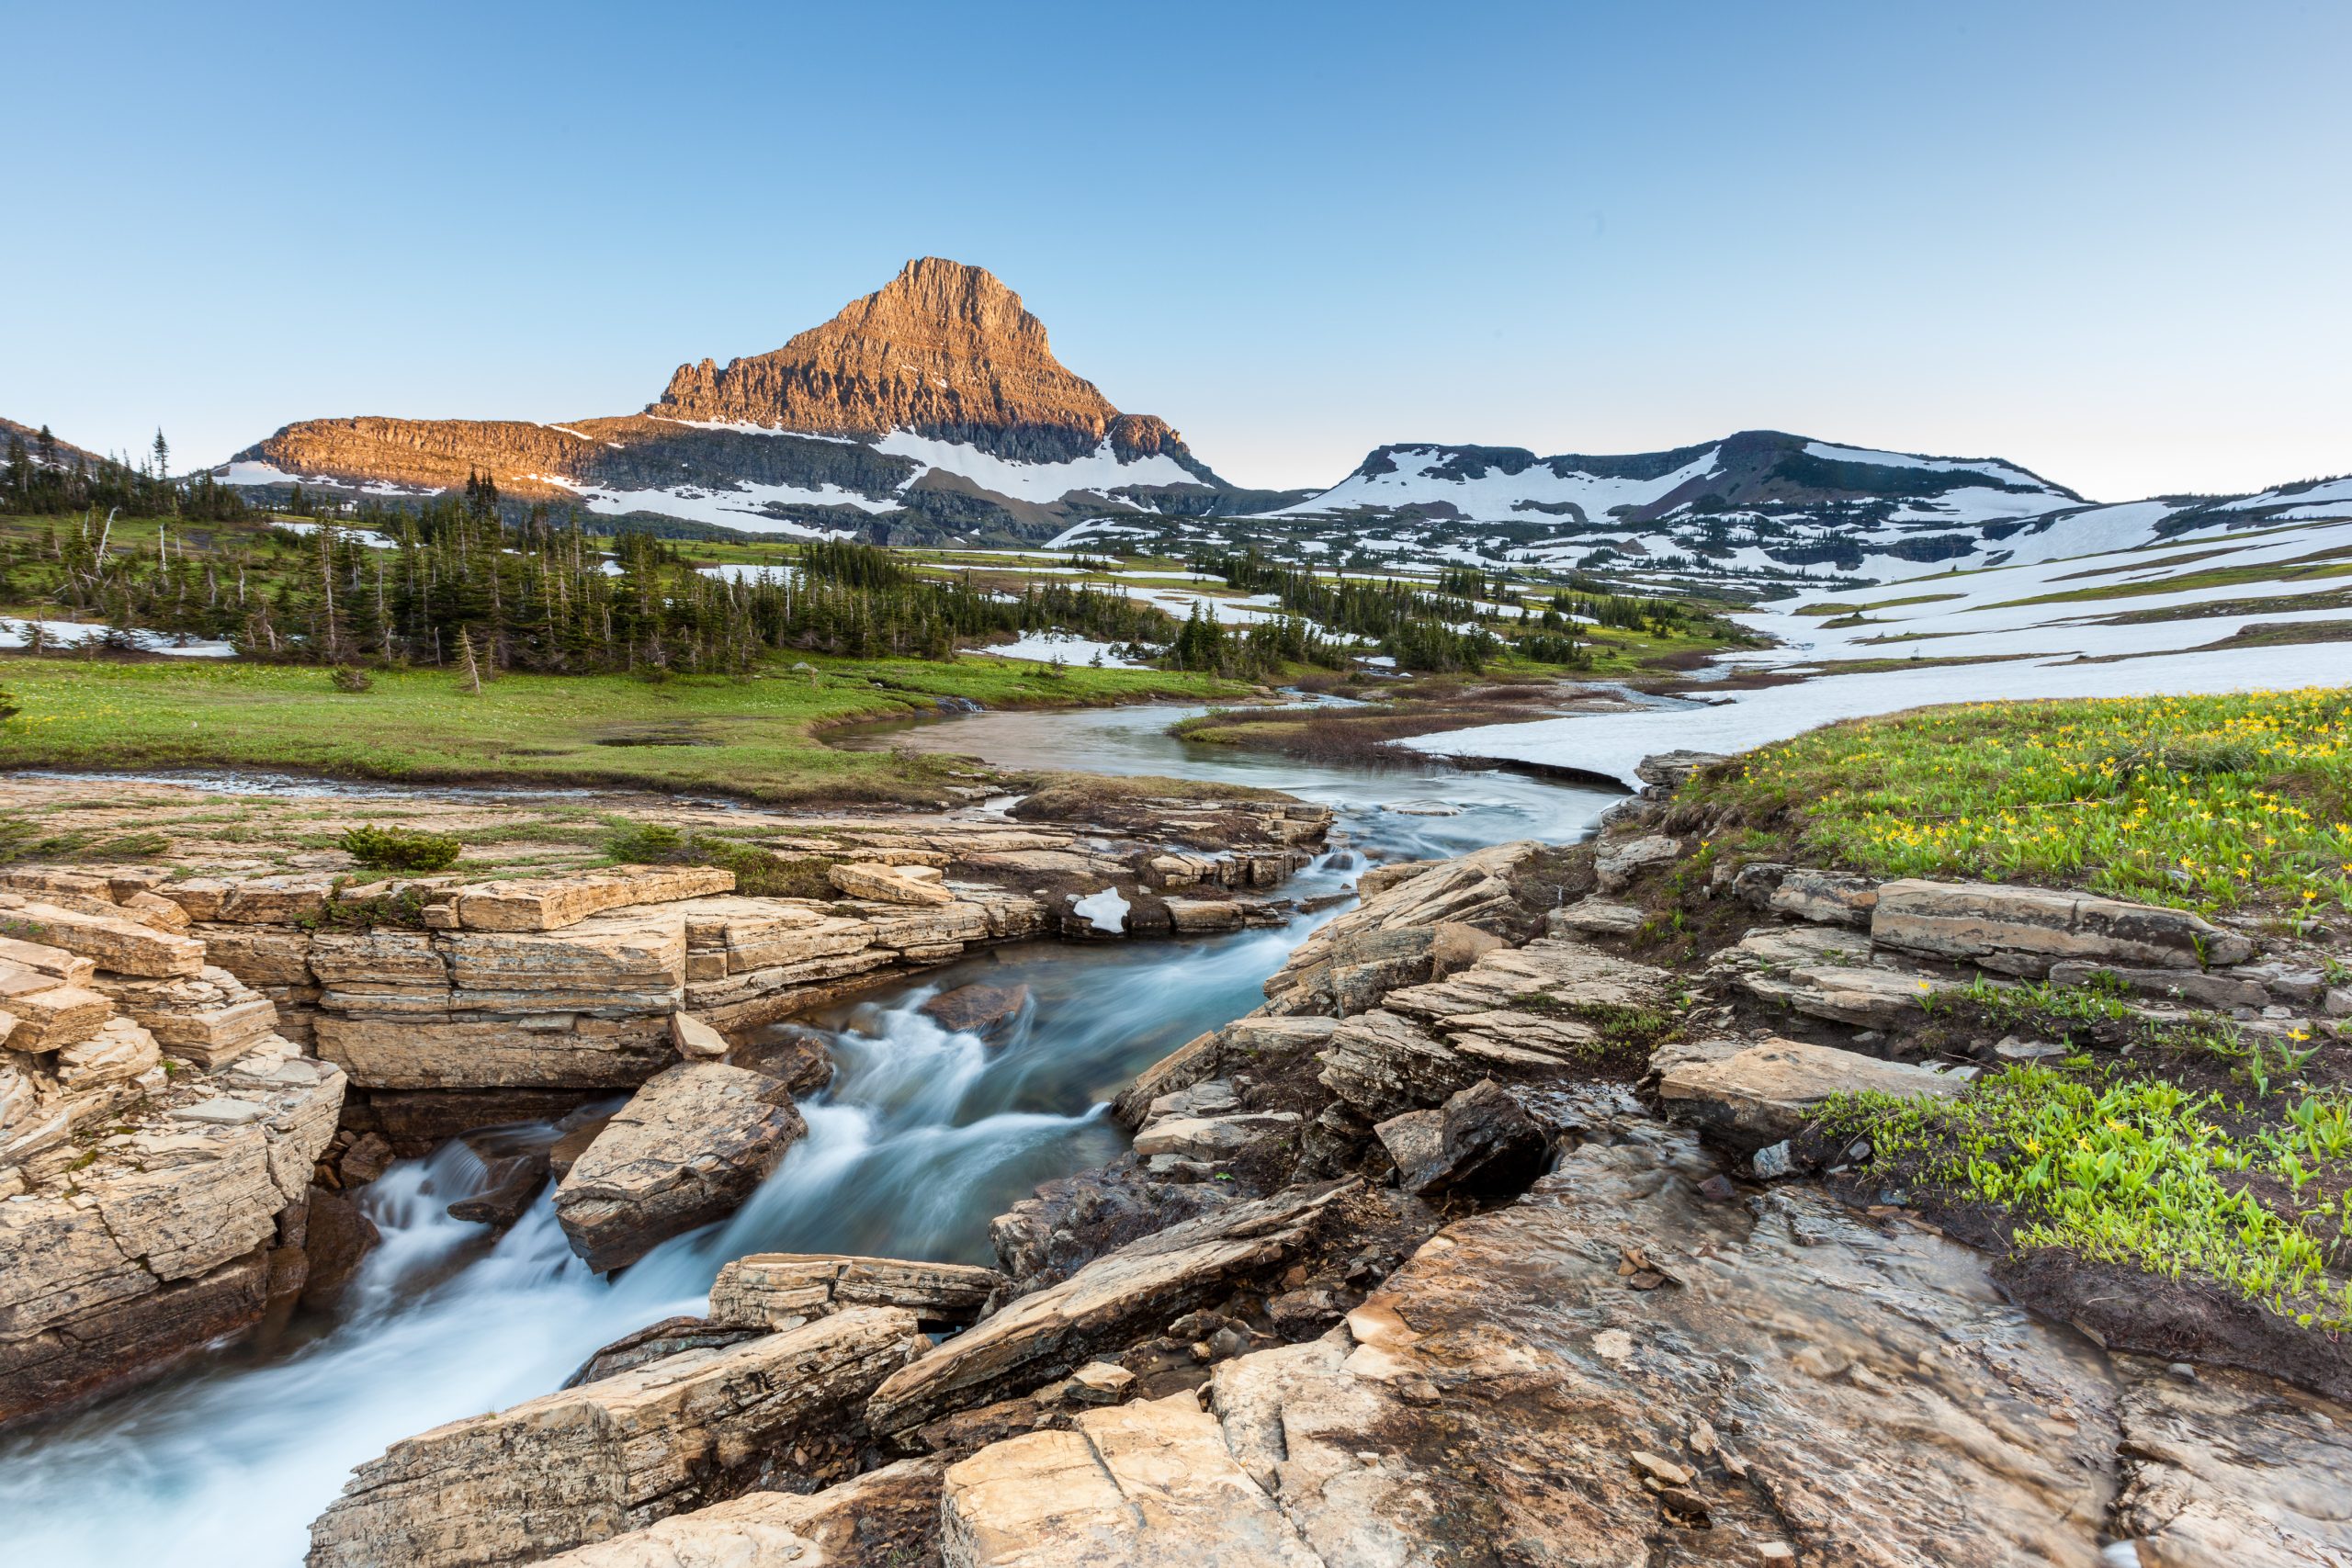 Waterfall at Logan Pass in Glacier National Park Montana with Reynolds Mountain in the background covered in snow